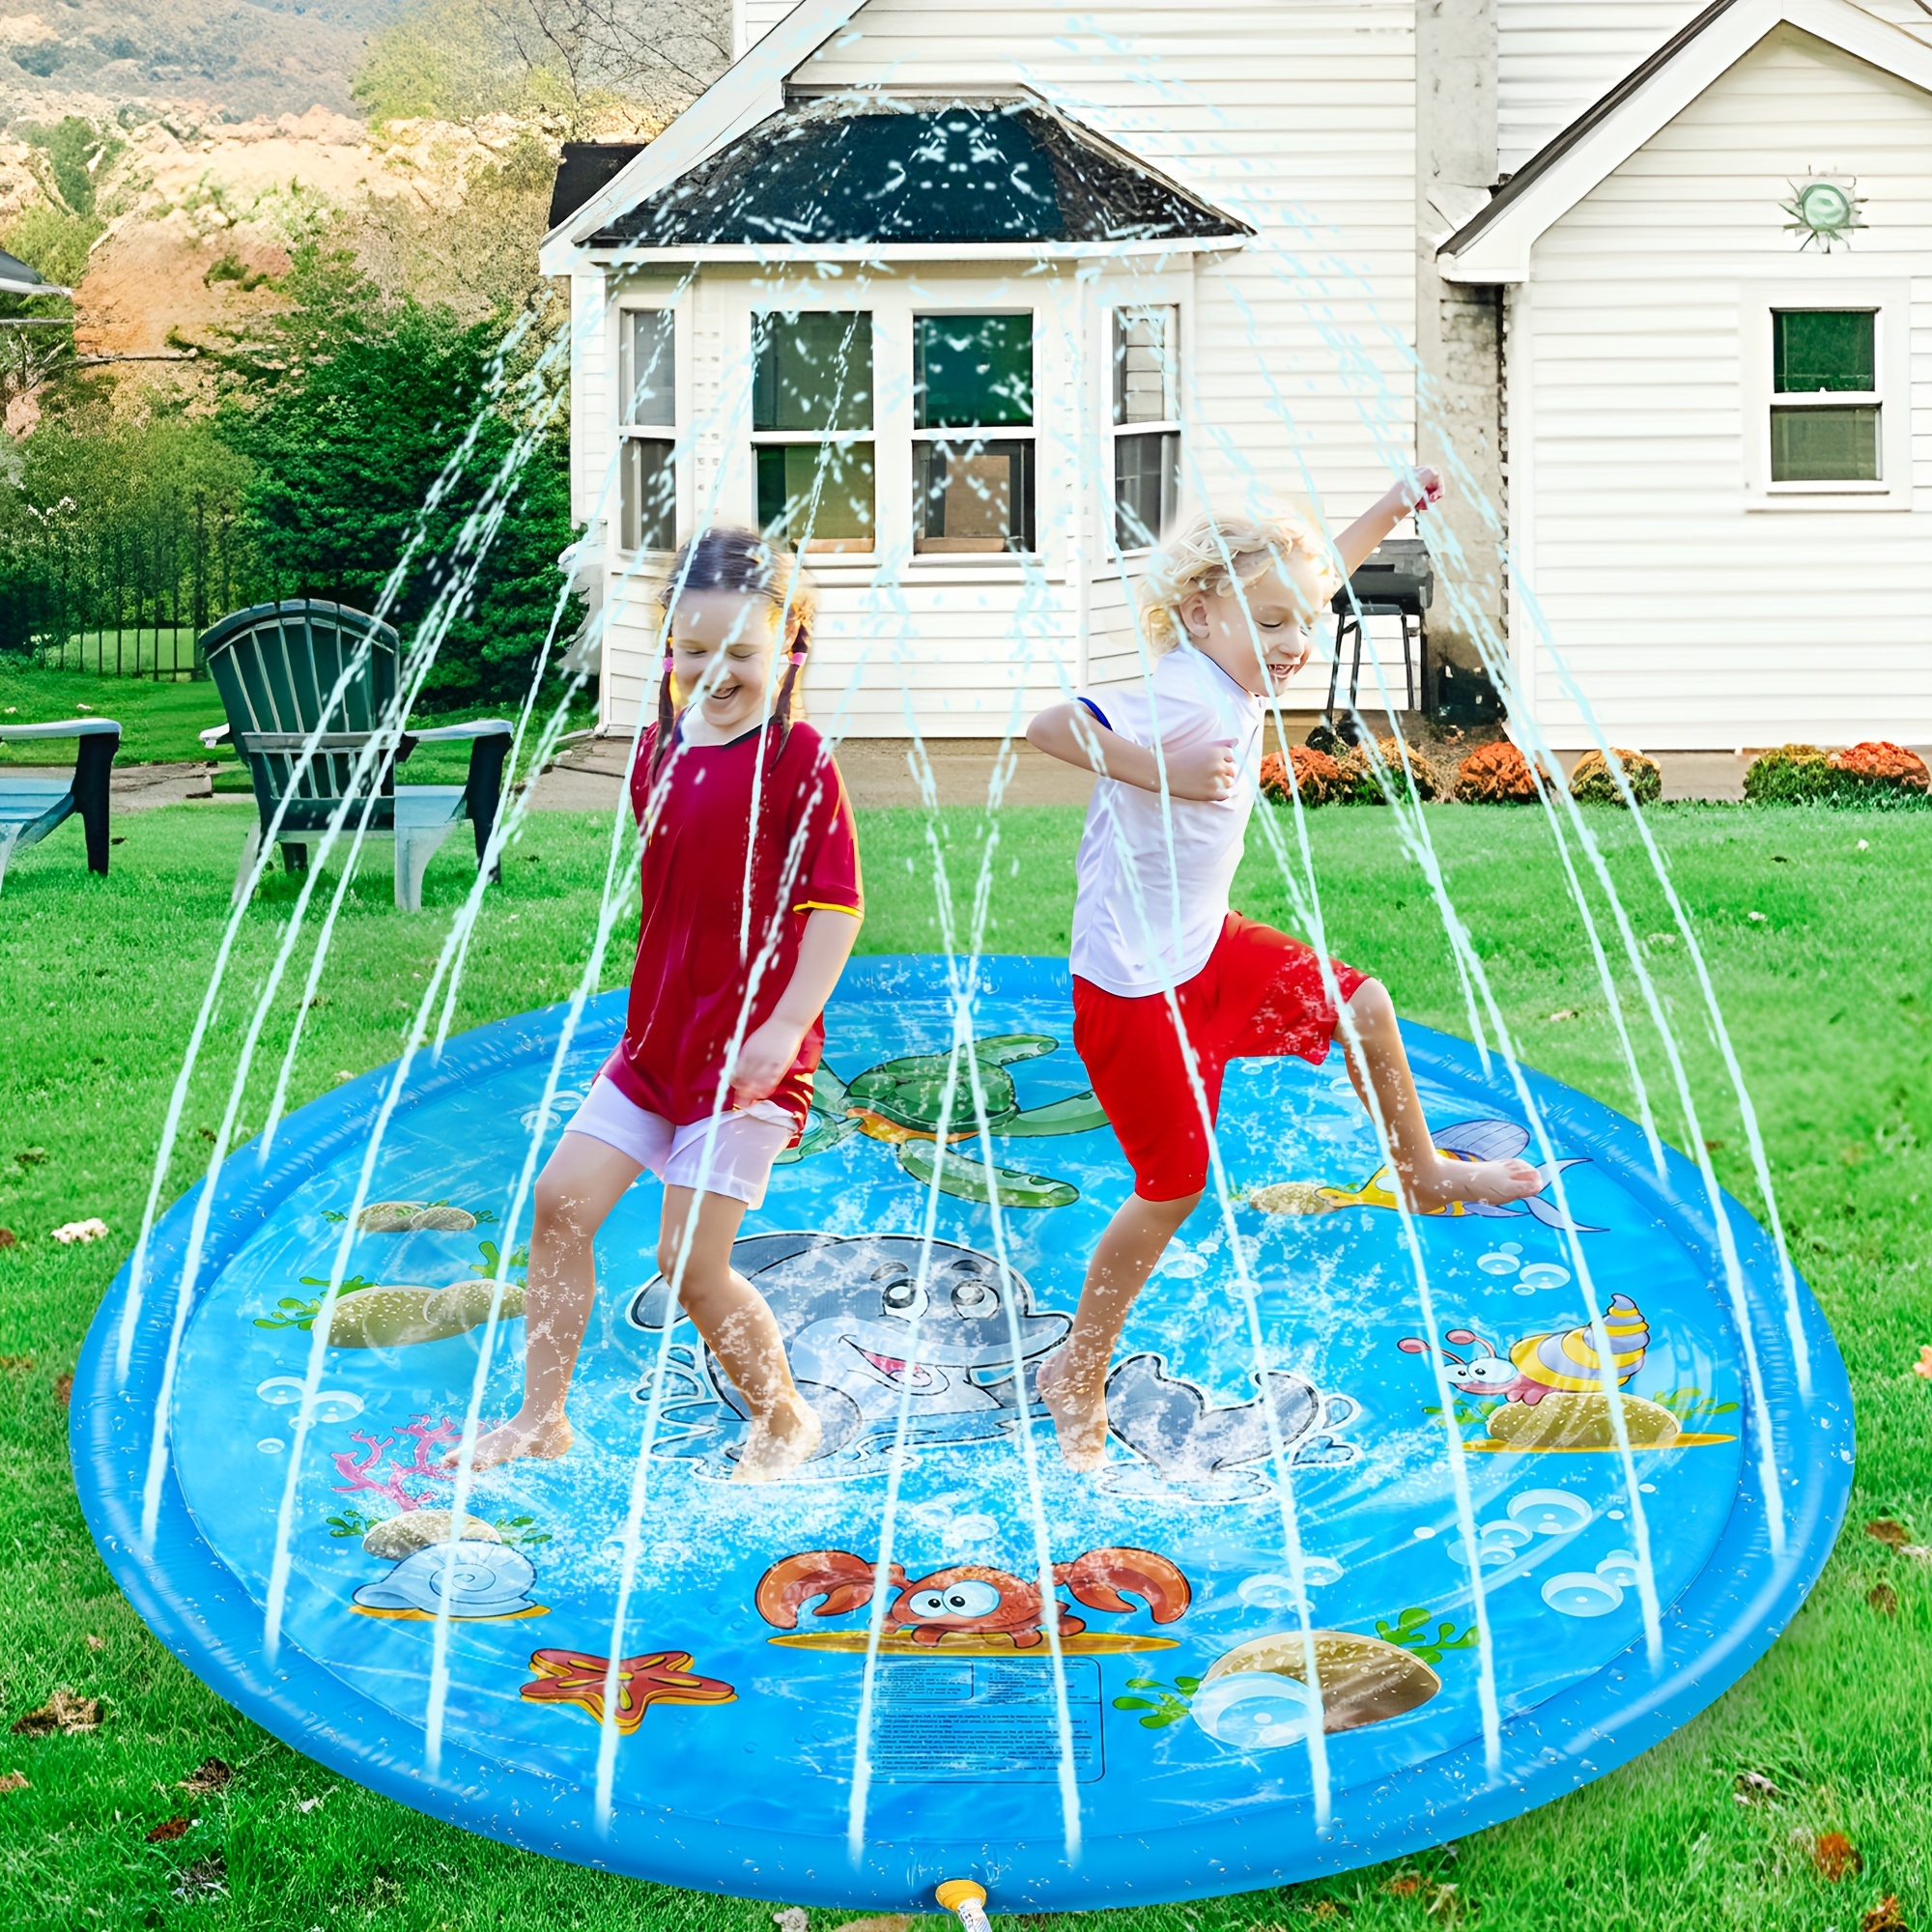 

1 Pack, Inflatable Splash Pad, 100cm Outdoor Play Mat, Foldable Sprinkler Play Mat, Sea Creatures Theme, Pvc Wading Pool For Toddlers, Water Spray Summer Toy For Garden Lawn, 39.37in Diameter